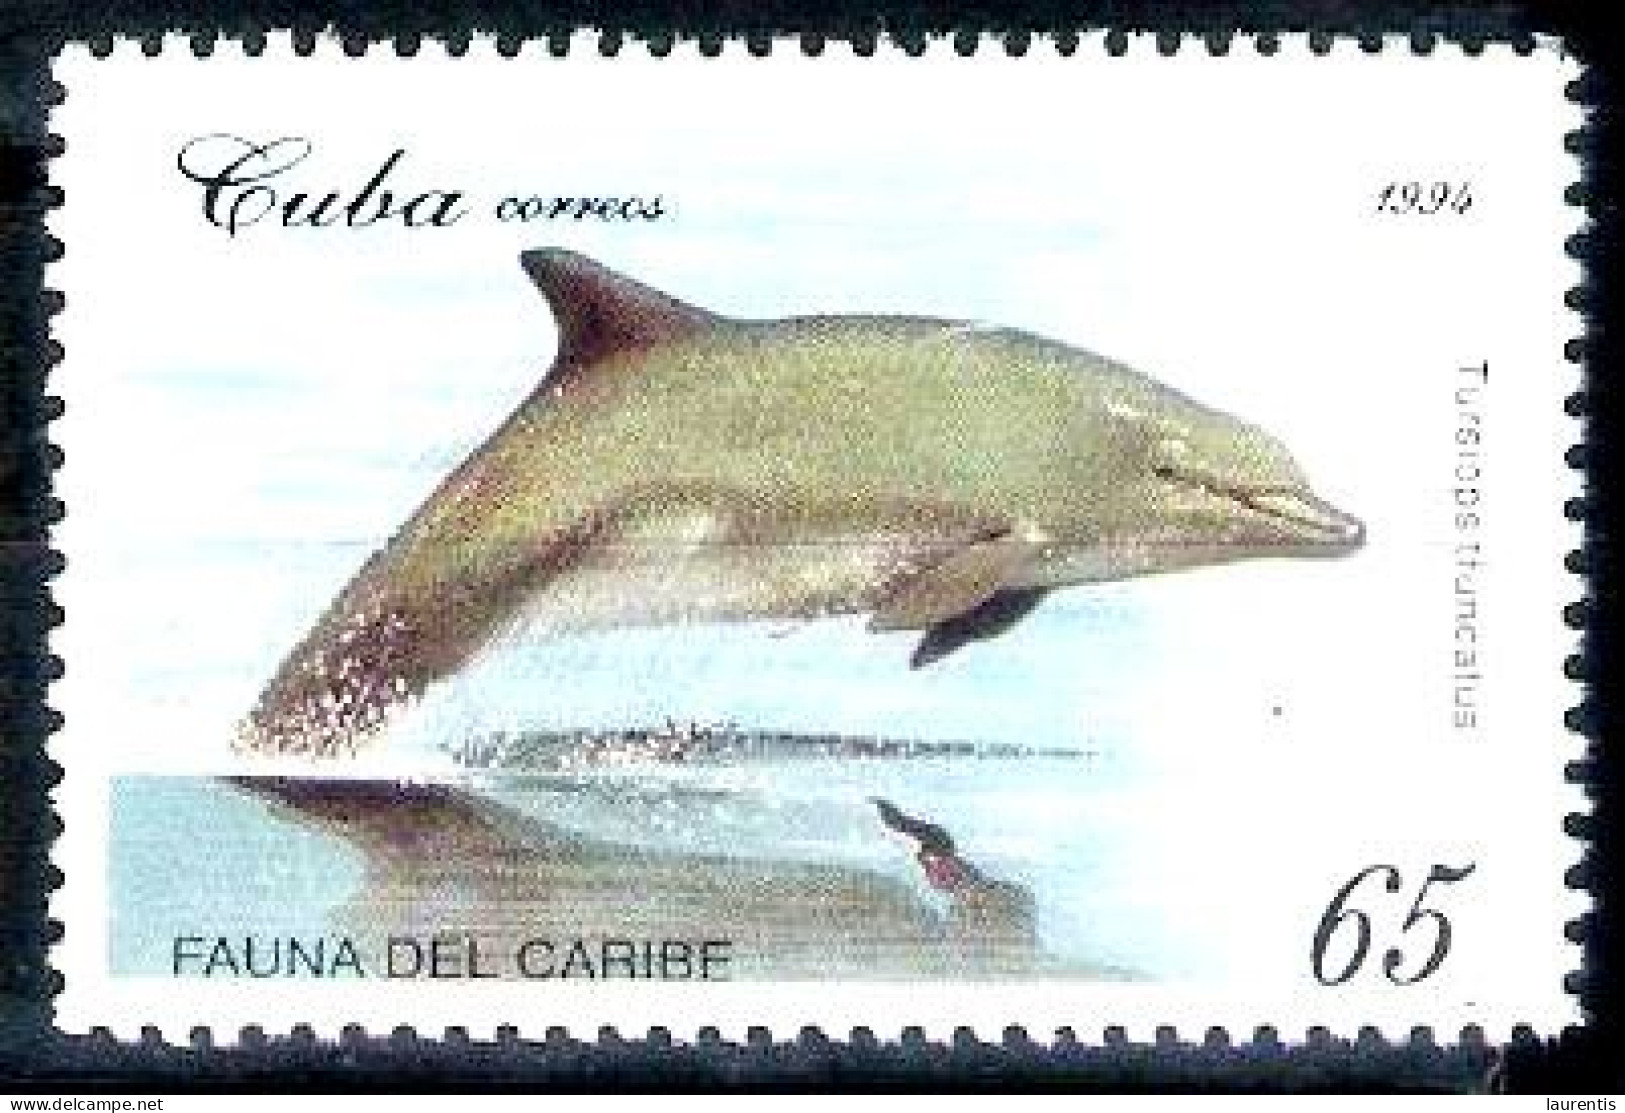 2858  Dolphins - Dauphins - 1994 - MNH - Only This Dolphin In The Stamp Set - Cb - 1,50. - Dauphins